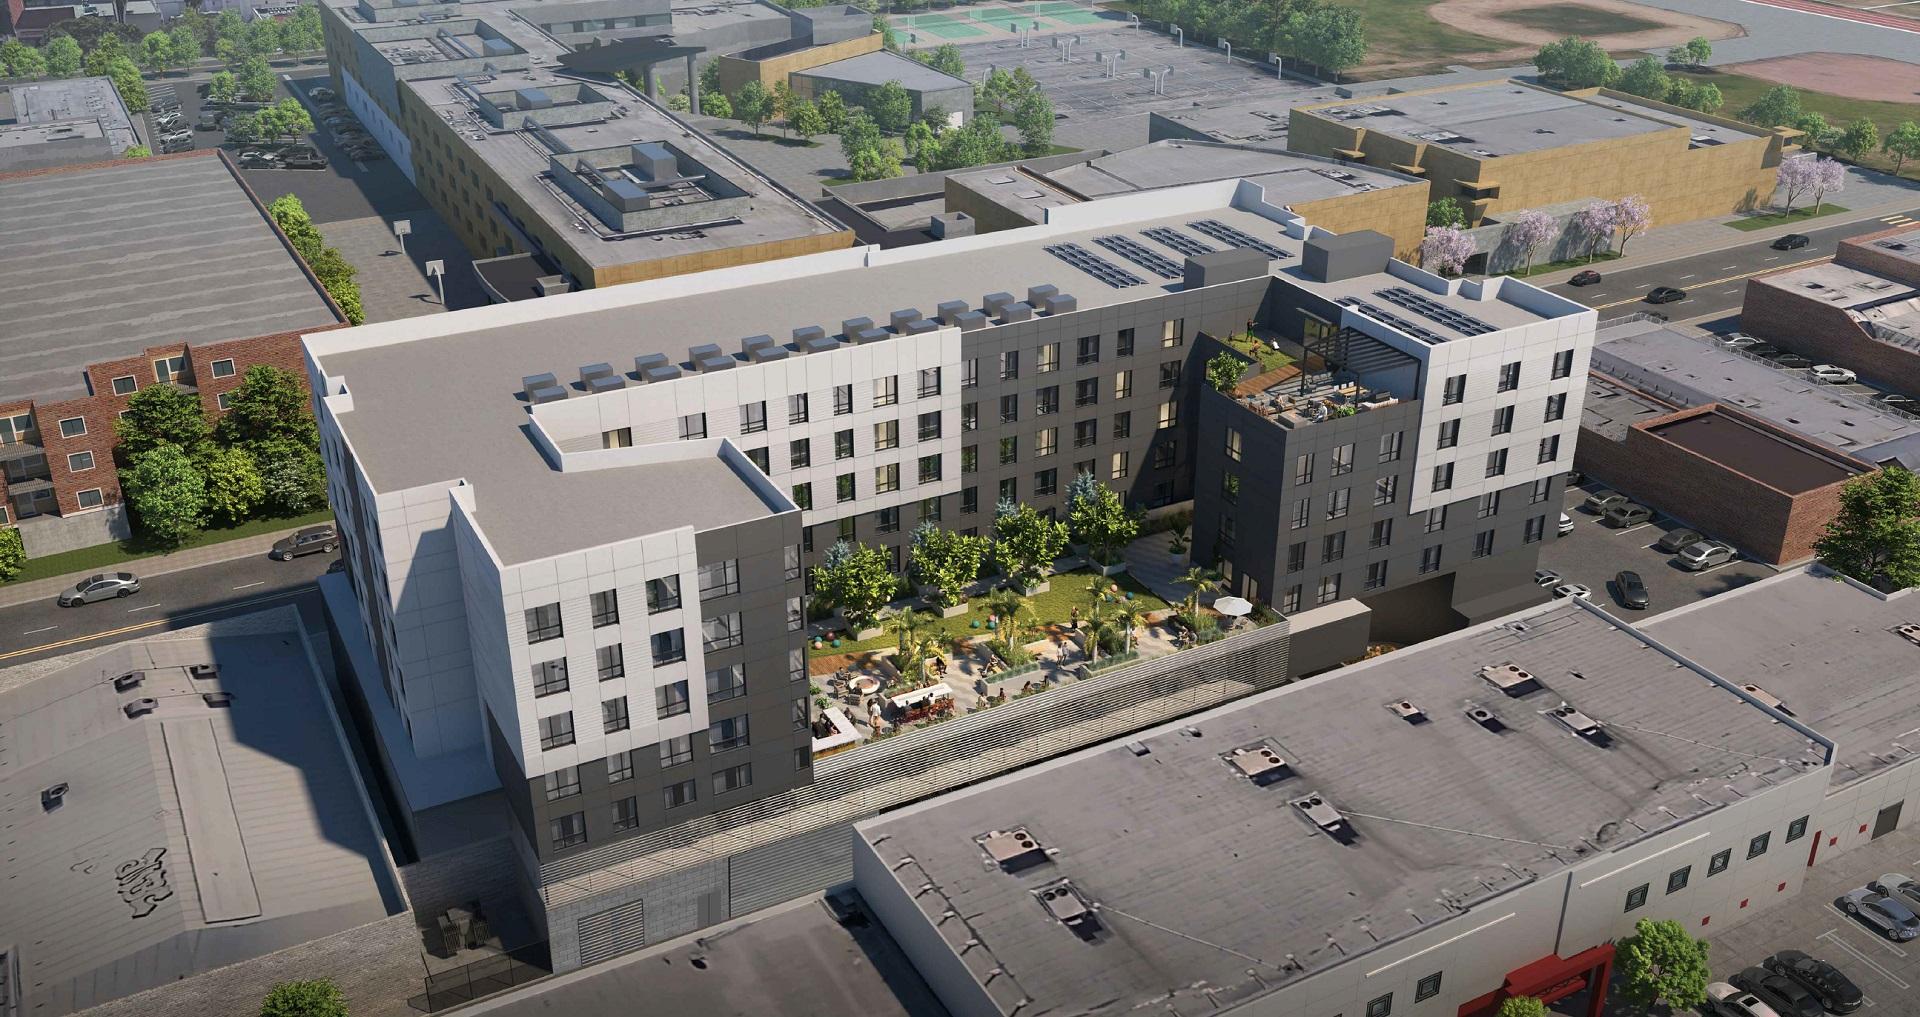 An aerial view of the rear of the new South Central Los Angeles multi-family residential project designed by Los Angeles multi-family residential architect AXIS